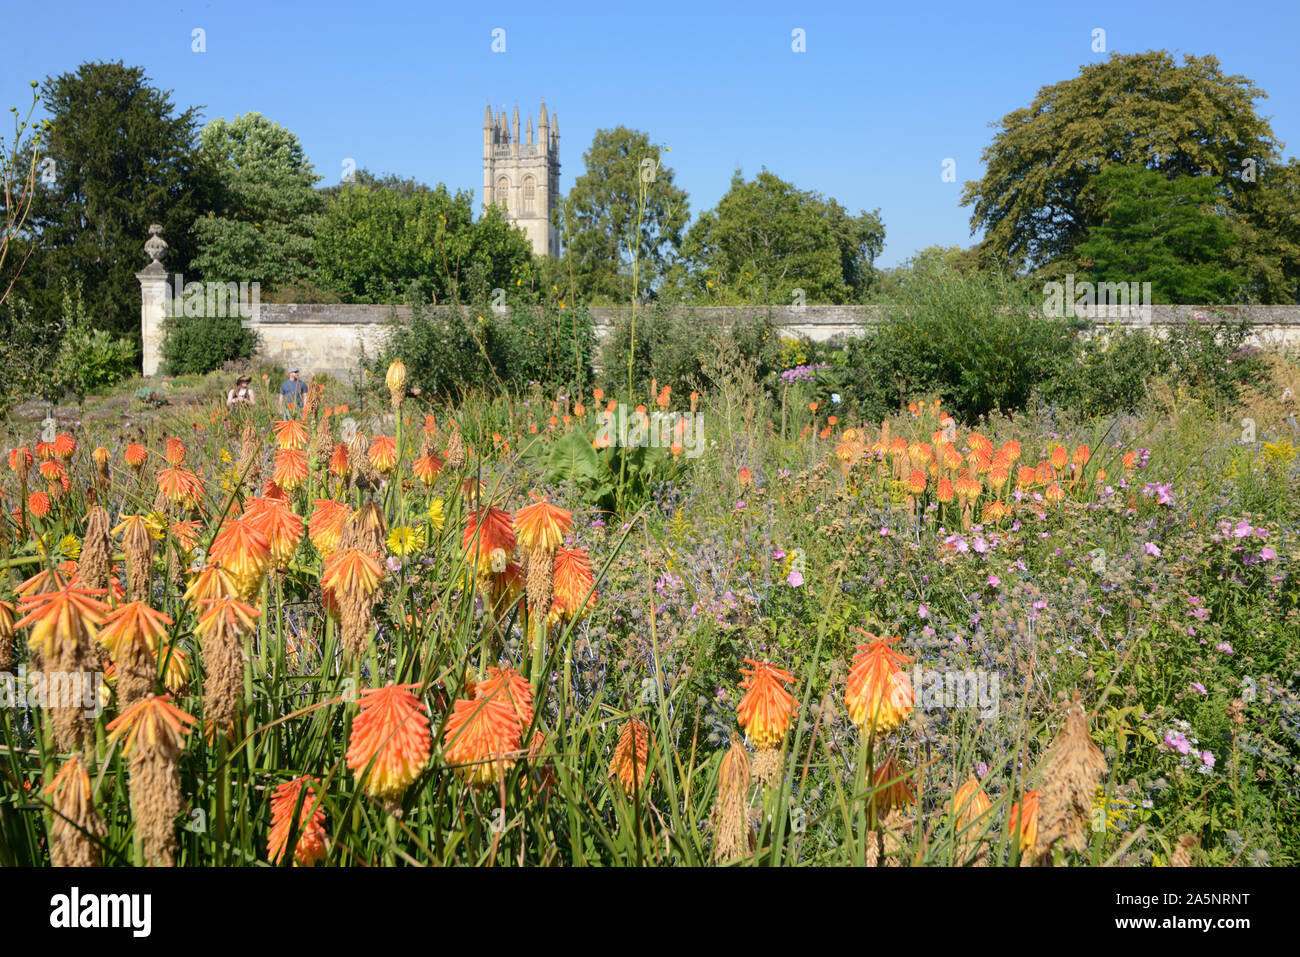 Red Hot Pokers or Kniphofia, part of South Africa Collection, at the University of Oxford Botanic Garden Oxford with Magdalen Tower in Background Stock Photo